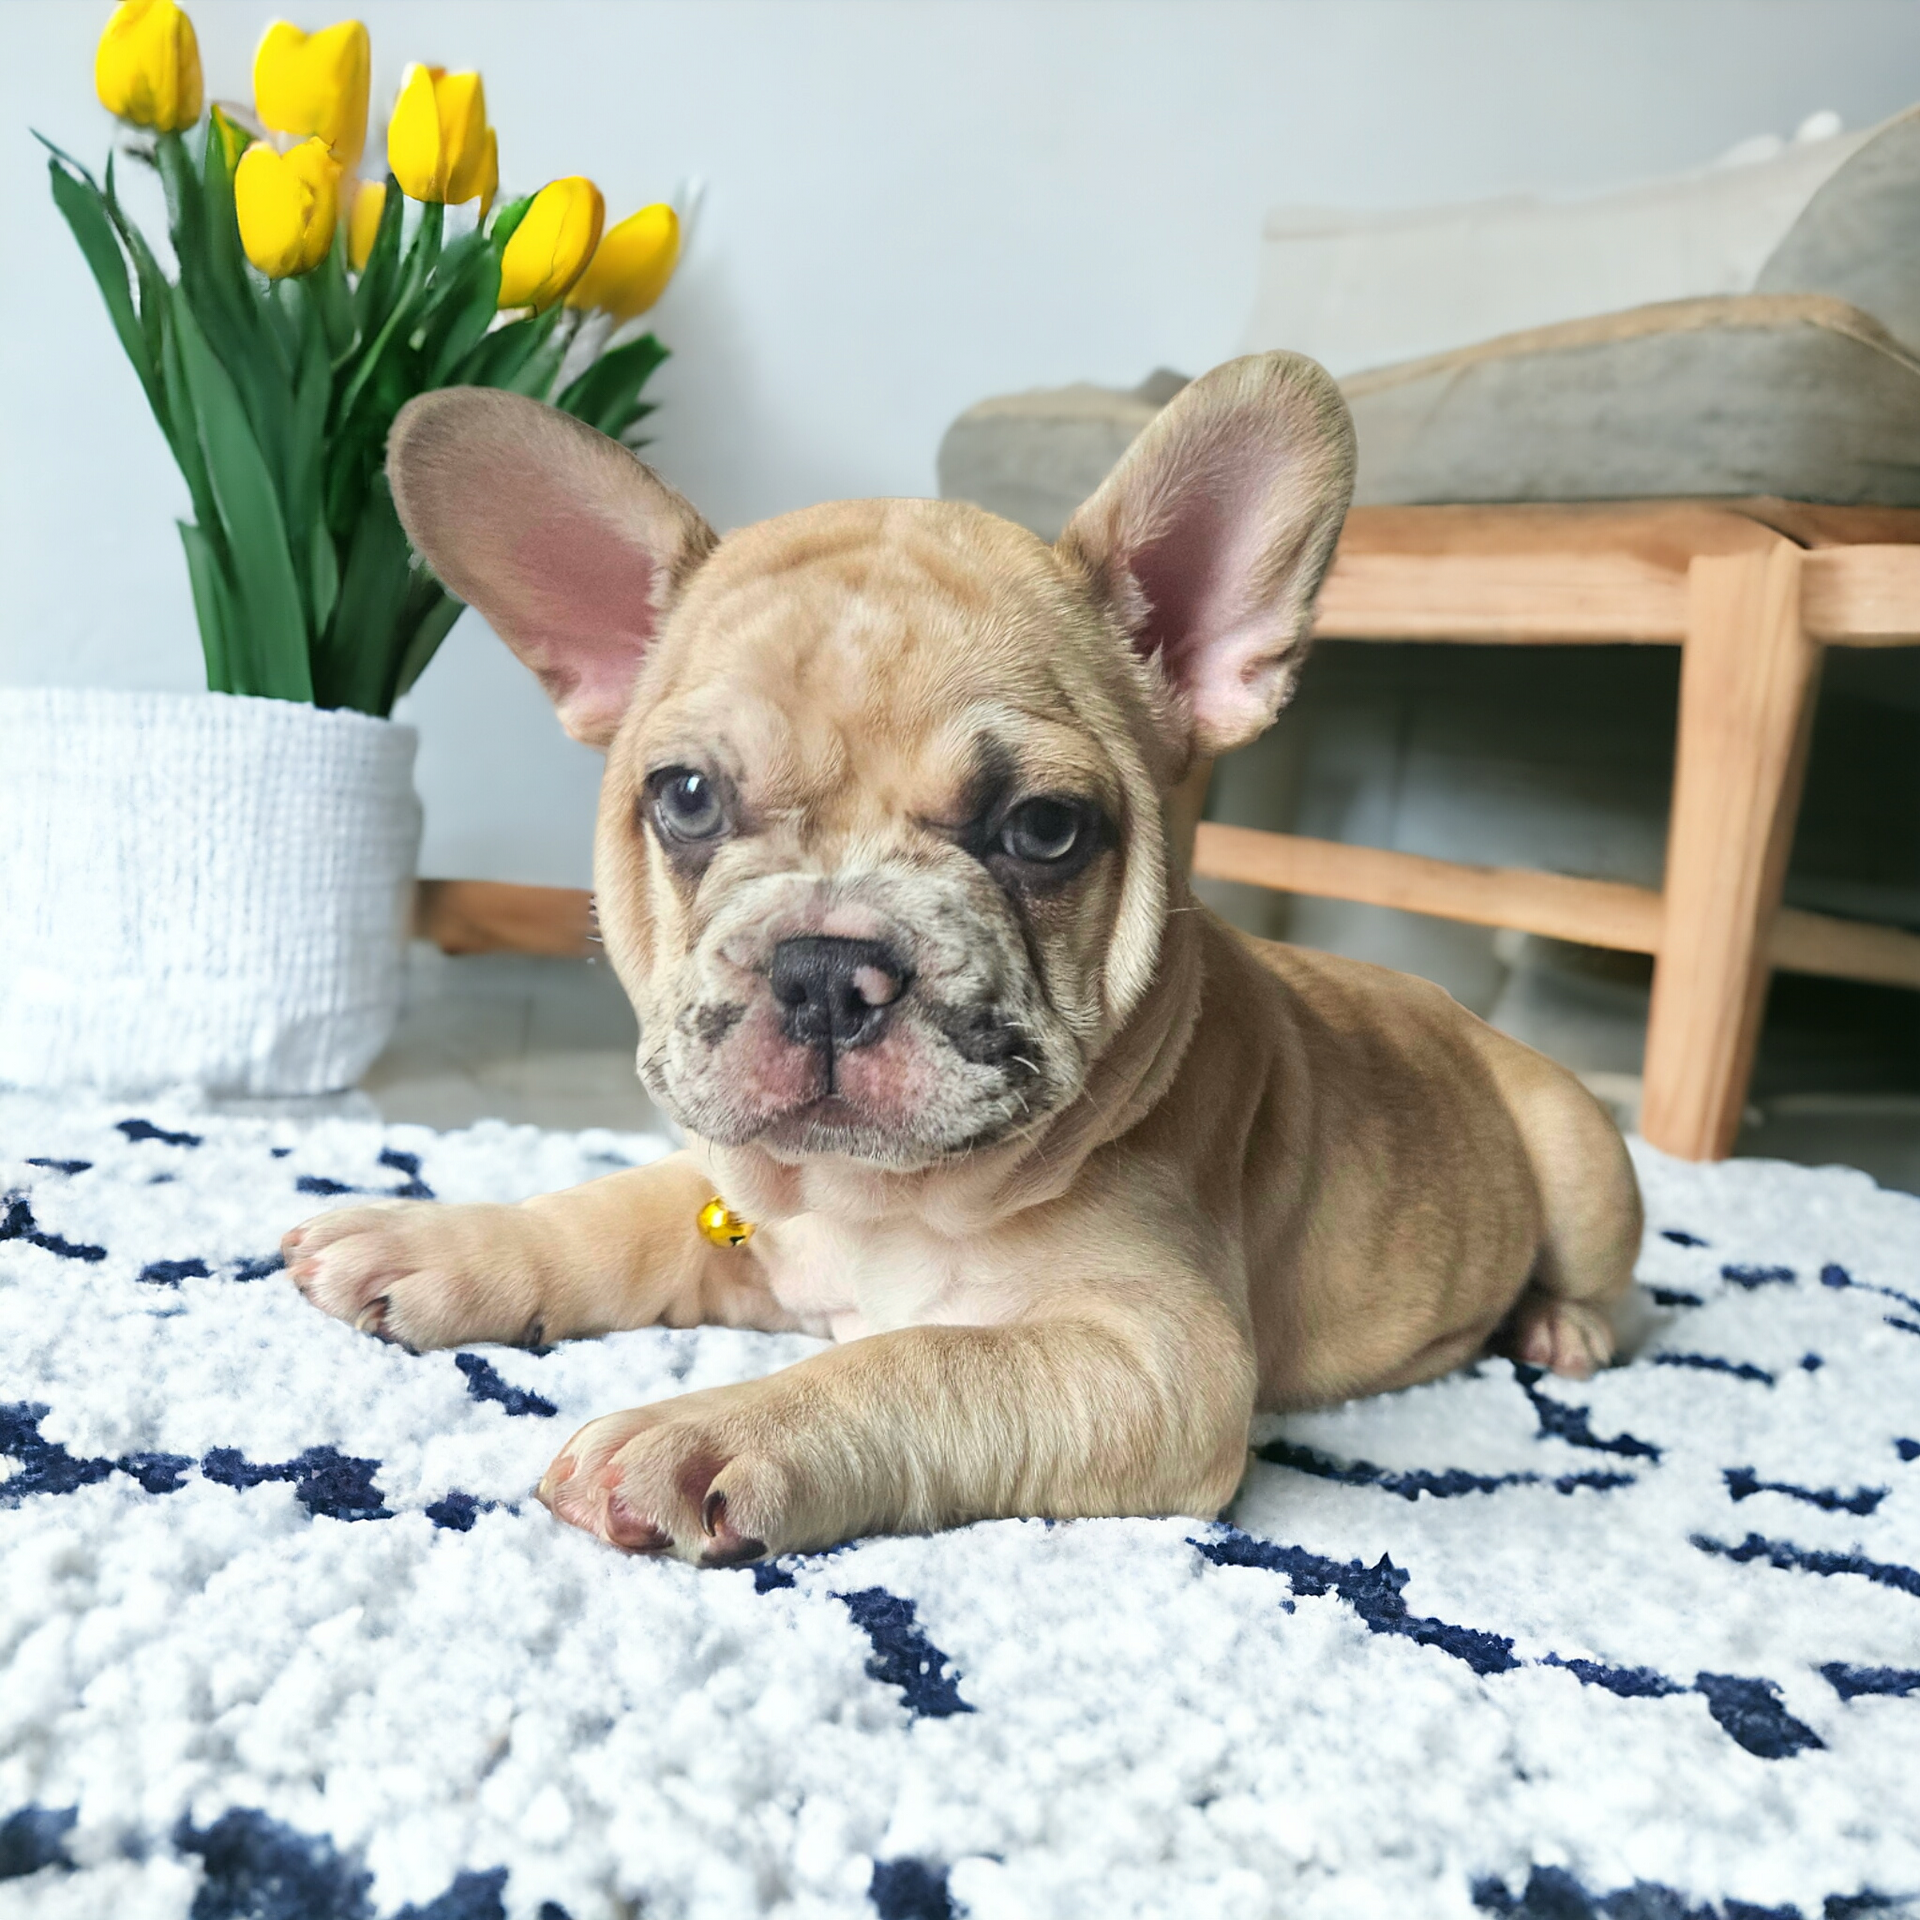 frenchies for sale,
puppies for sale,
Merle,french bulldog,
puppy, puppies, frenchies,bully,
for sale, cutie puppies, sale
puppies for sale,
stud services, Services, Whelping ,